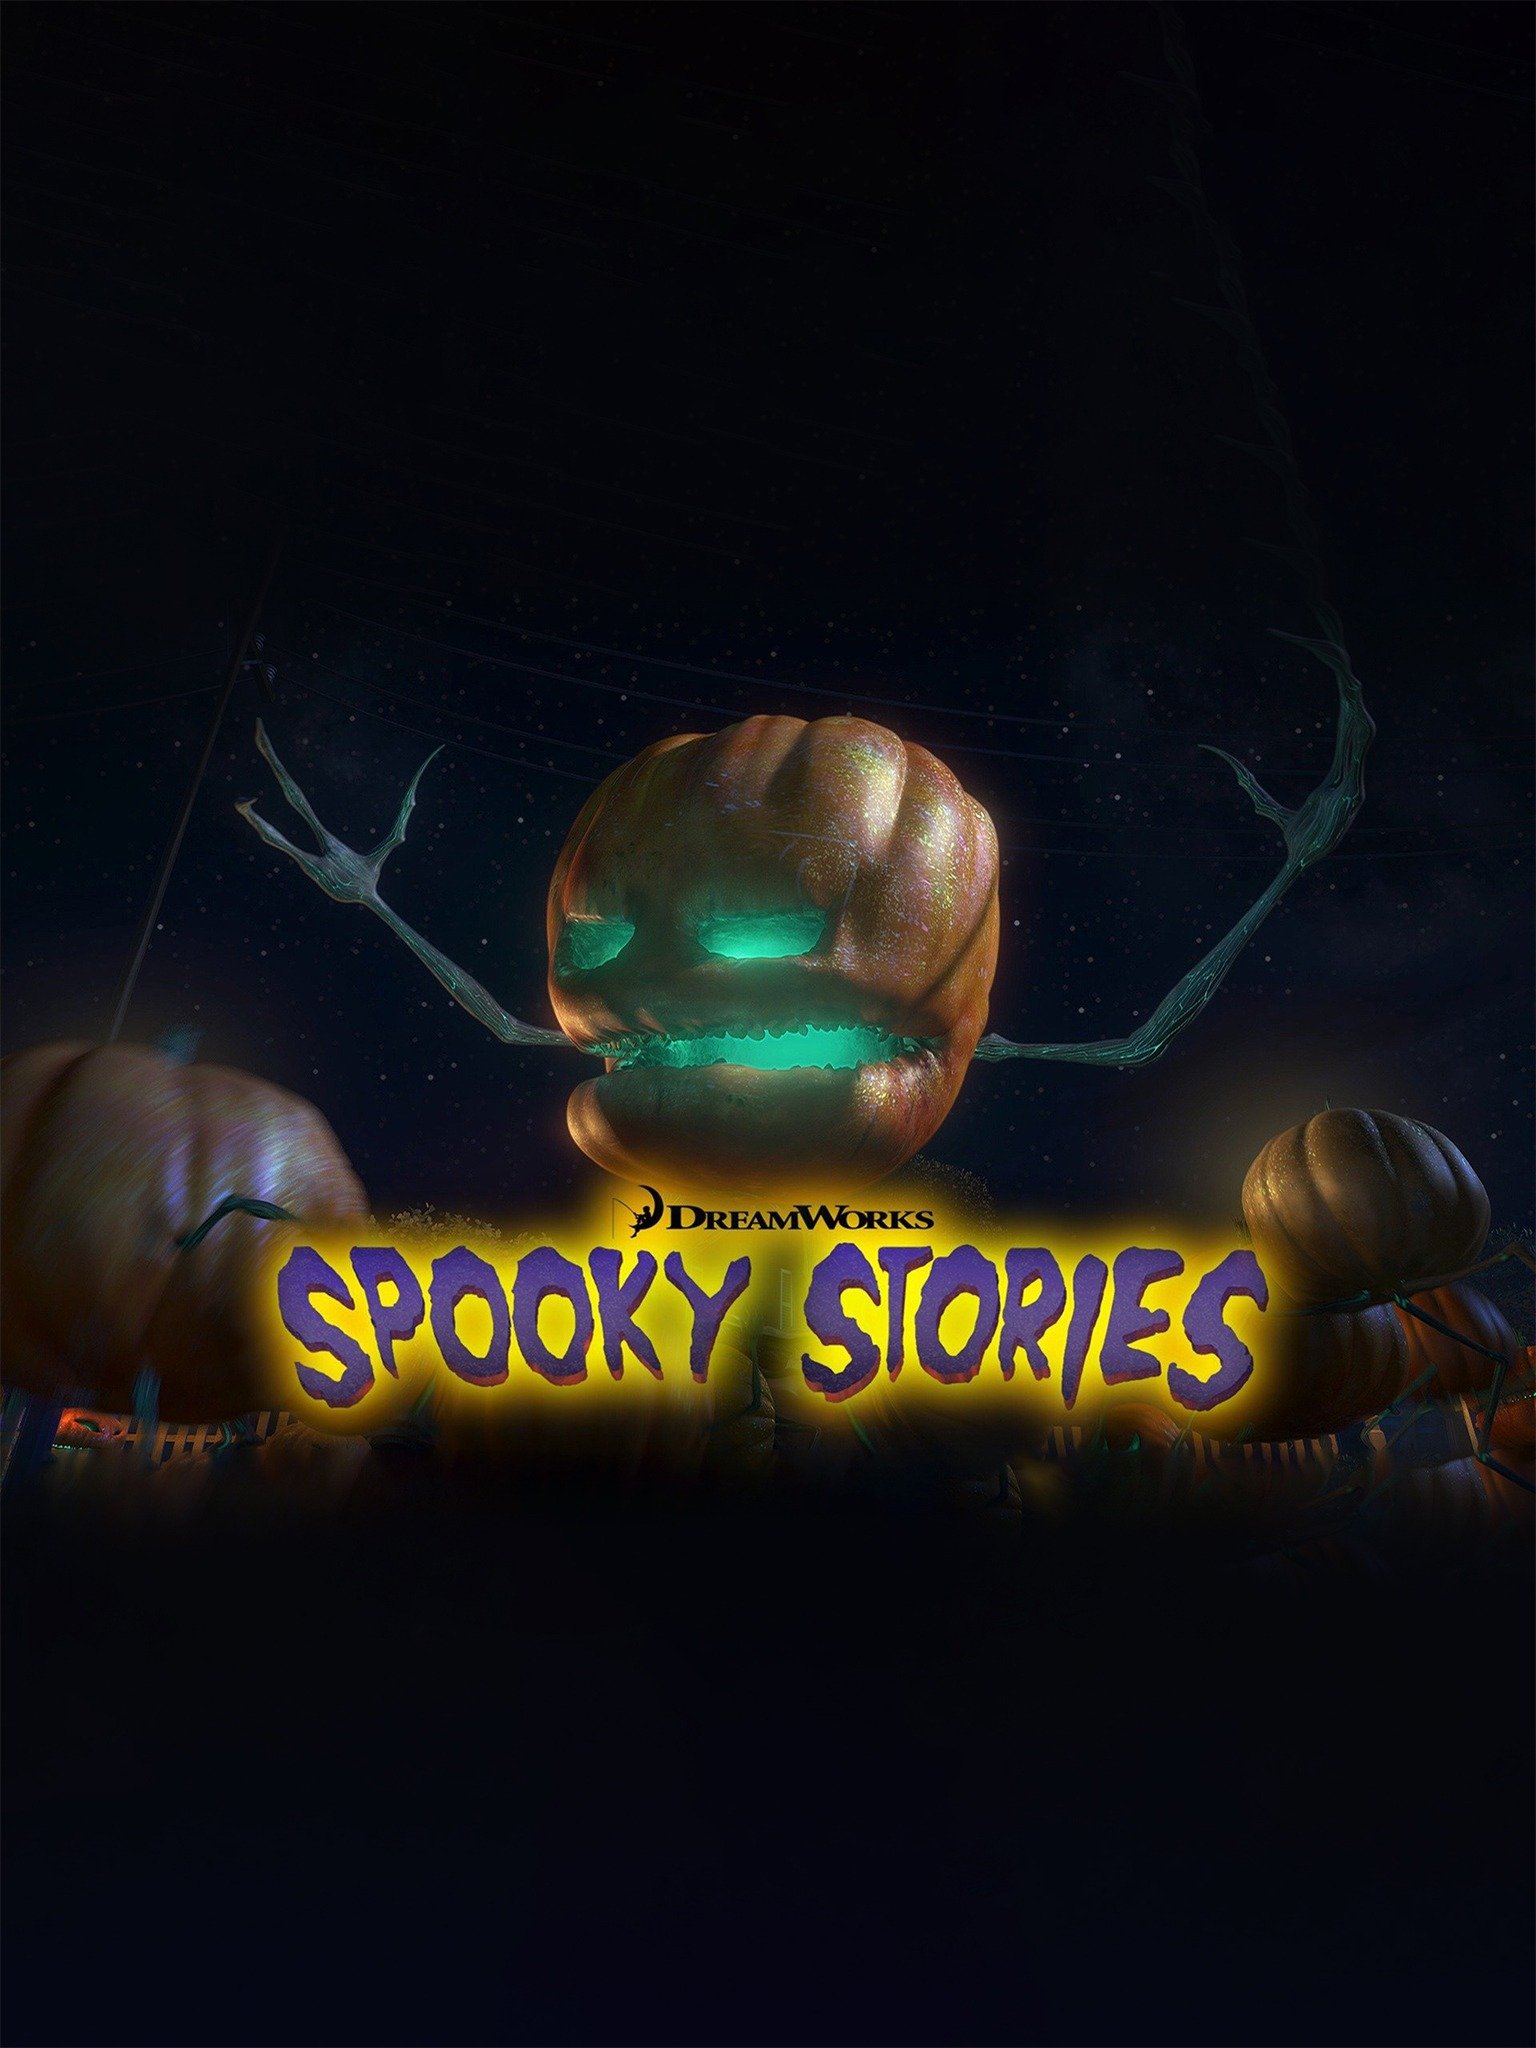 Dreamworks Spooky Stories Rotten Tomatoes 